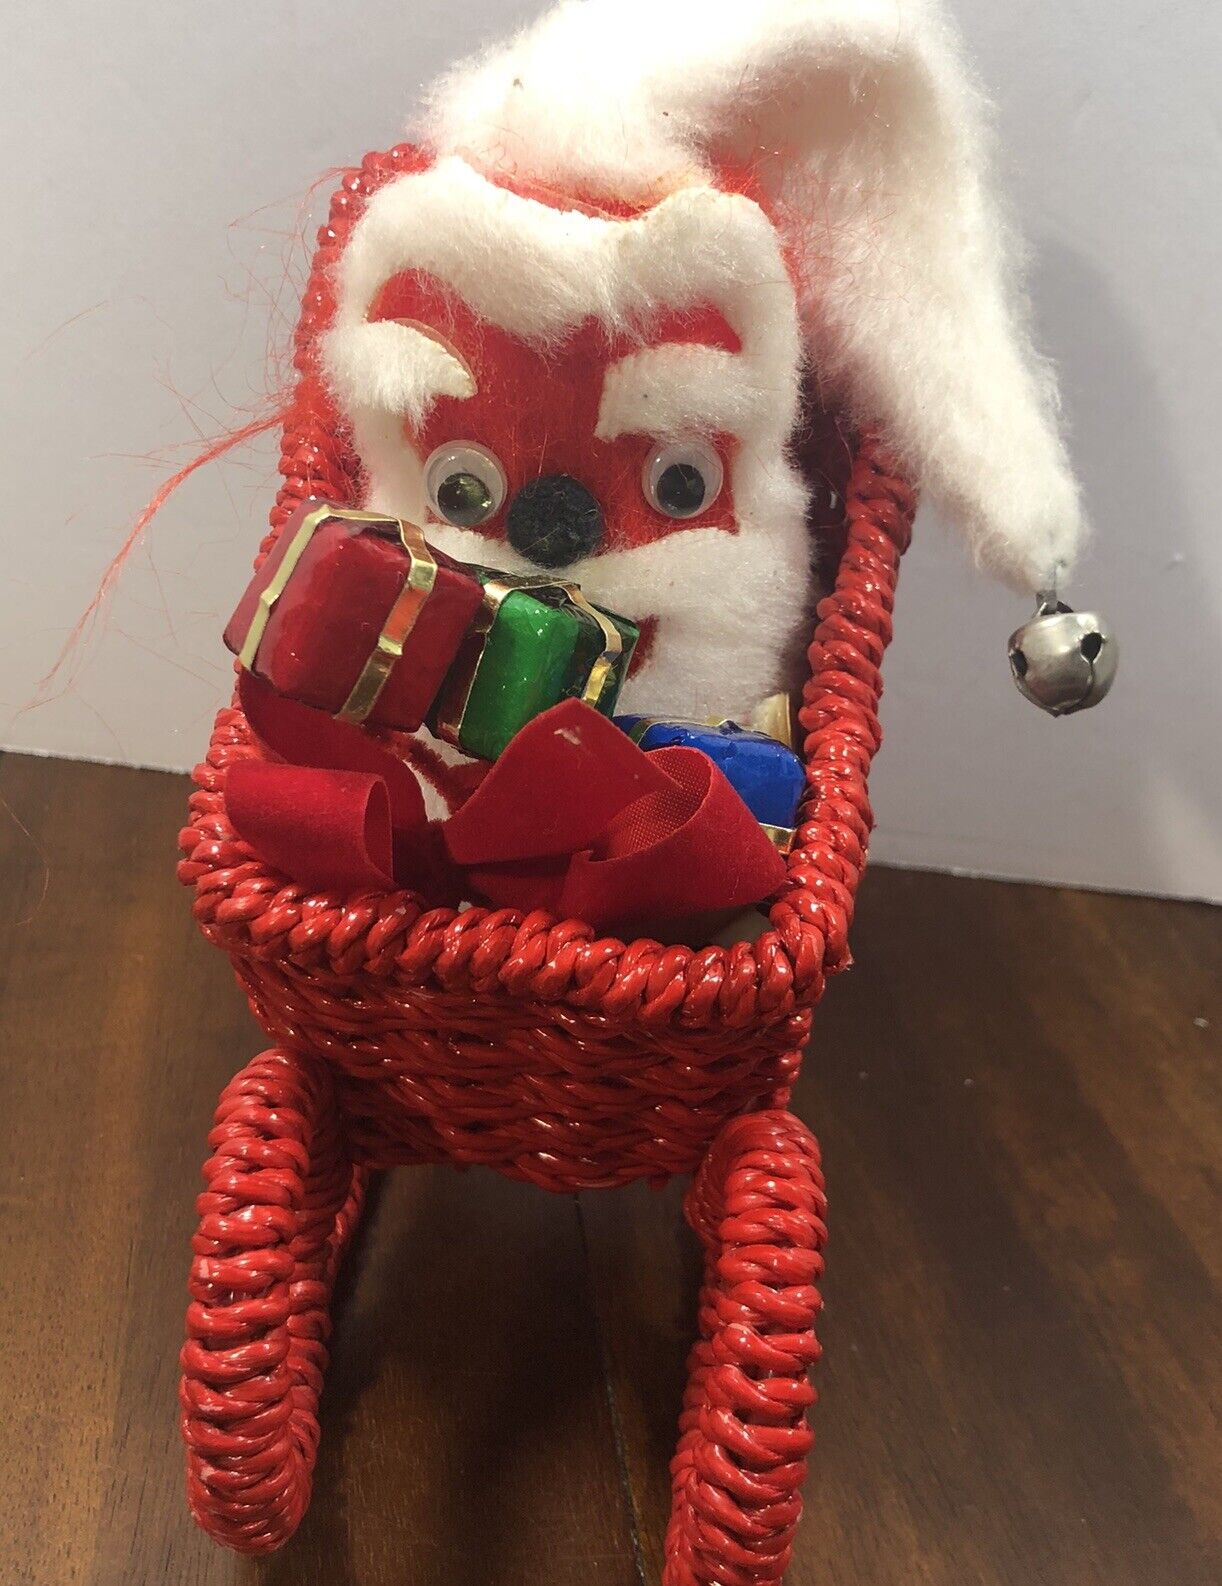 Vintage Fuzzy Christmas Plush Santa Guy In Sled Woolworth’s 25 Cents Kitsch